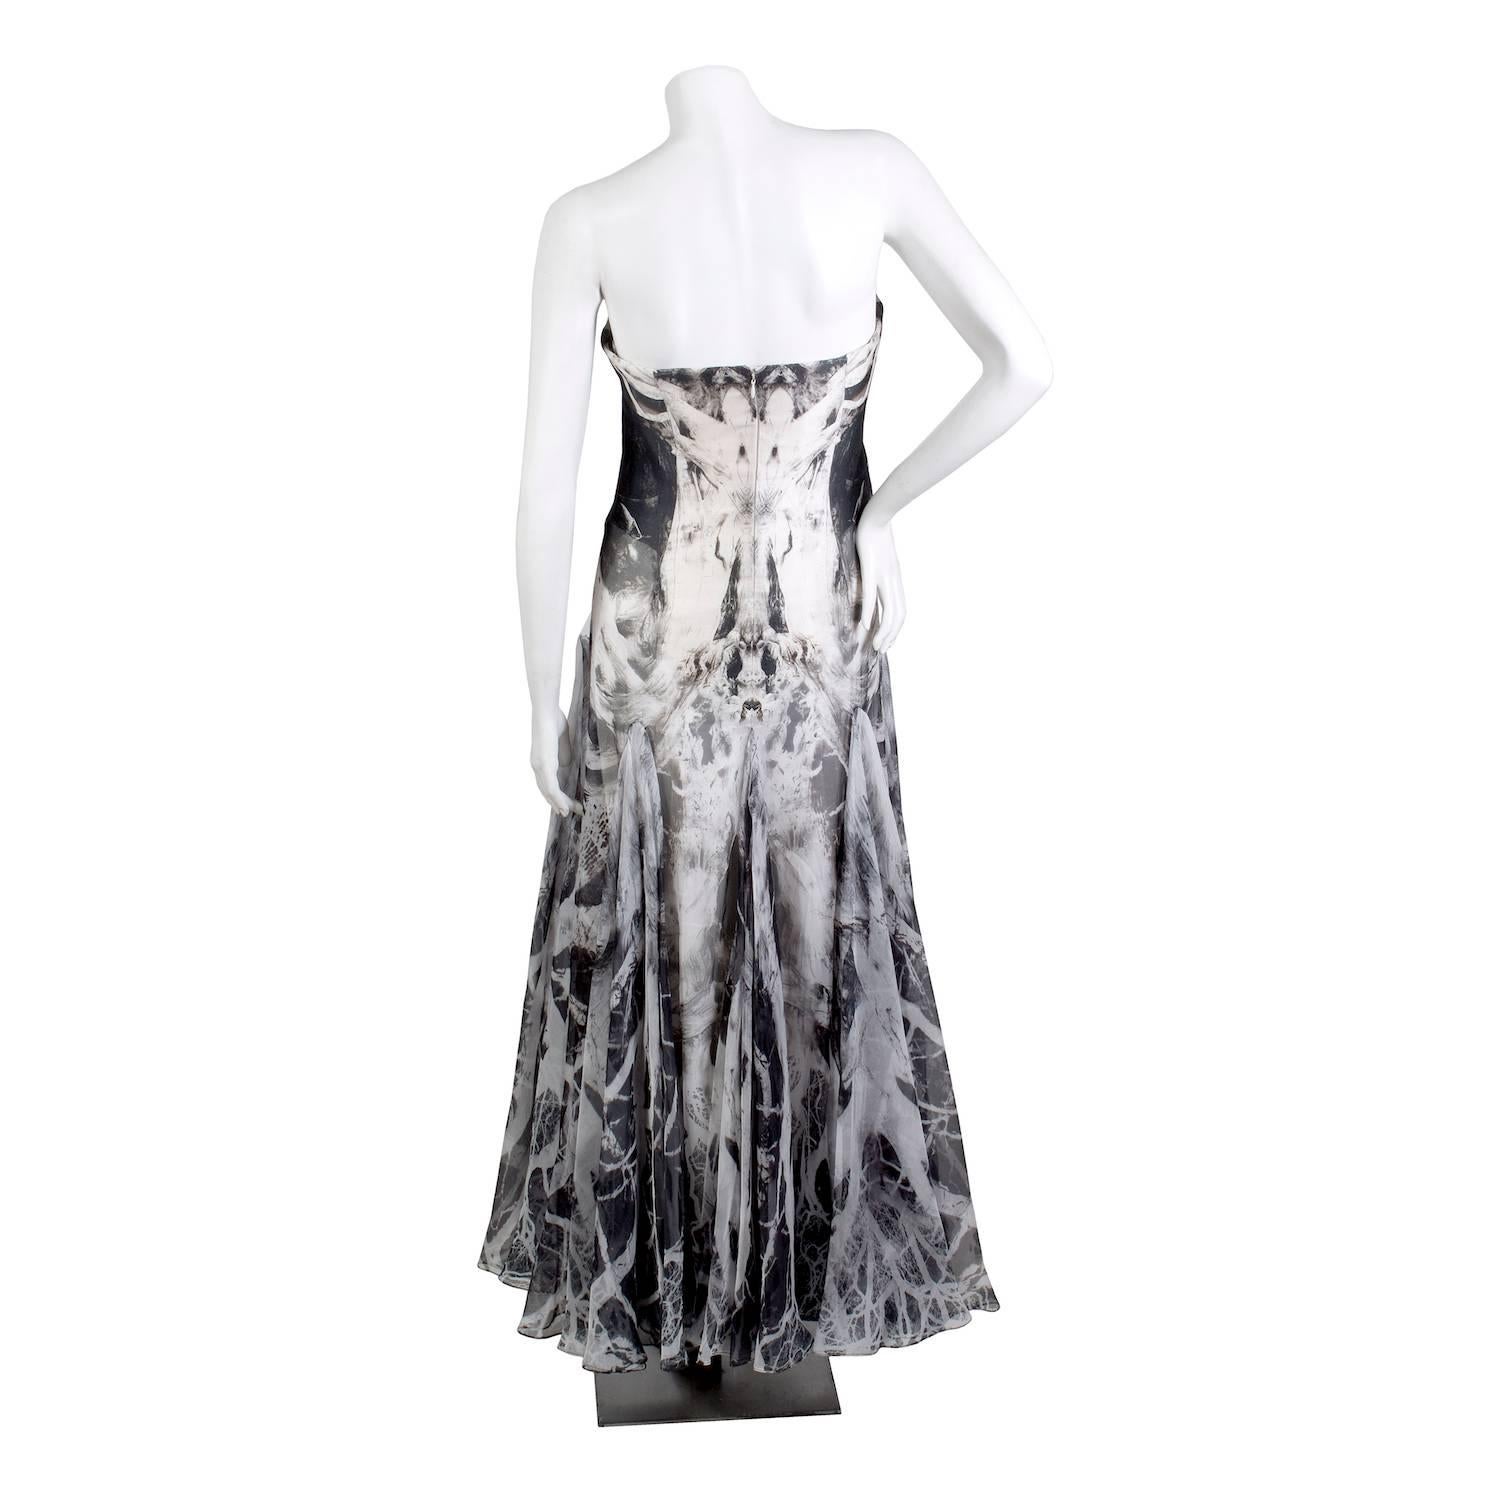 Women's Alexander McQueen Strapless Gown with Black and White Photographic Print, 2010